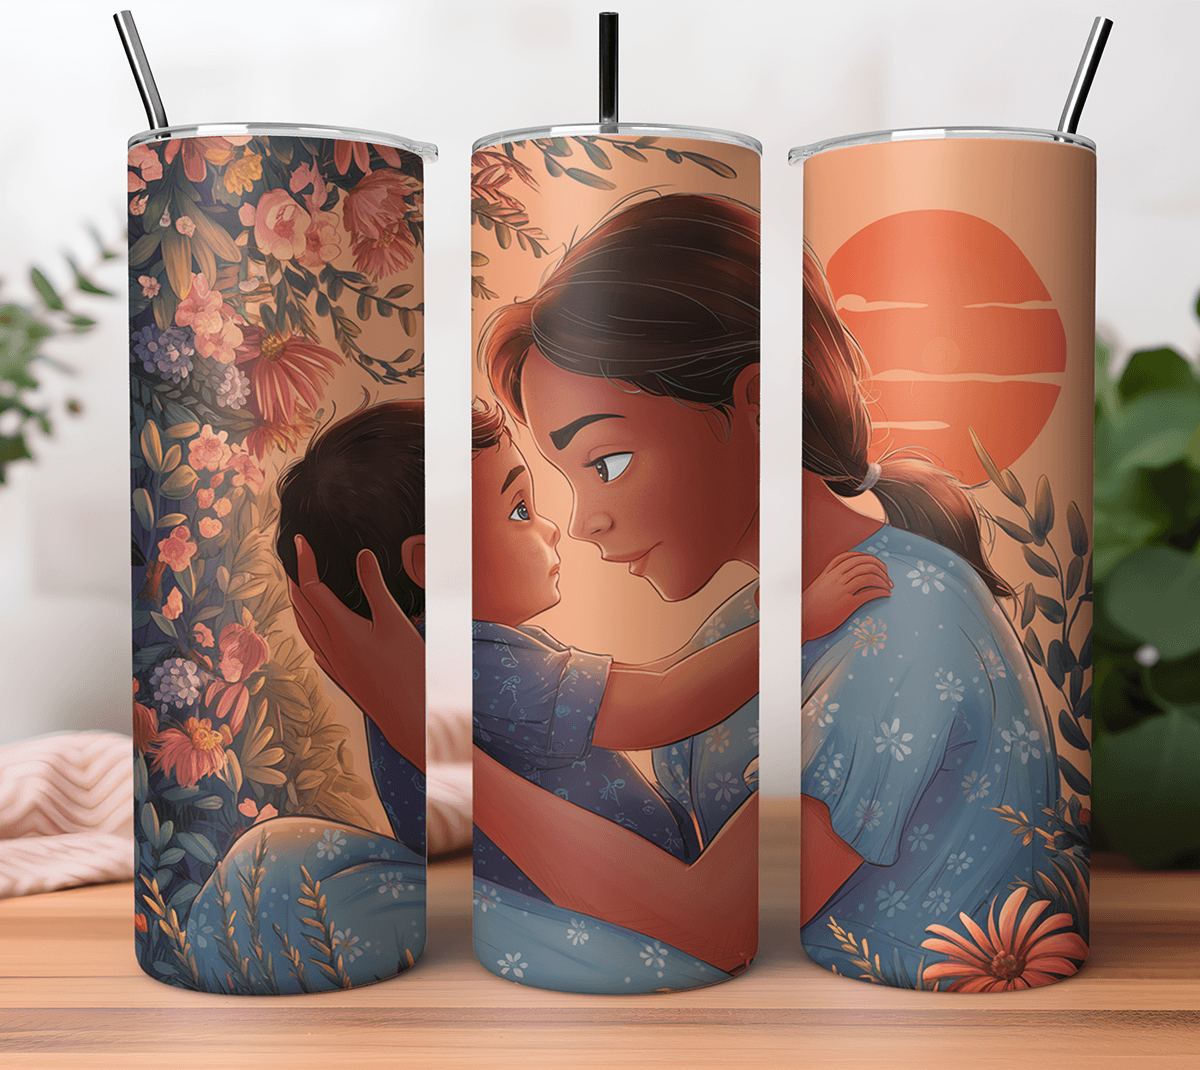 mom Mother's Day graphic design  tumbler design sublimation mom and baby Digital Art  ILLUSTRATION  tumbler wrap sublimation design